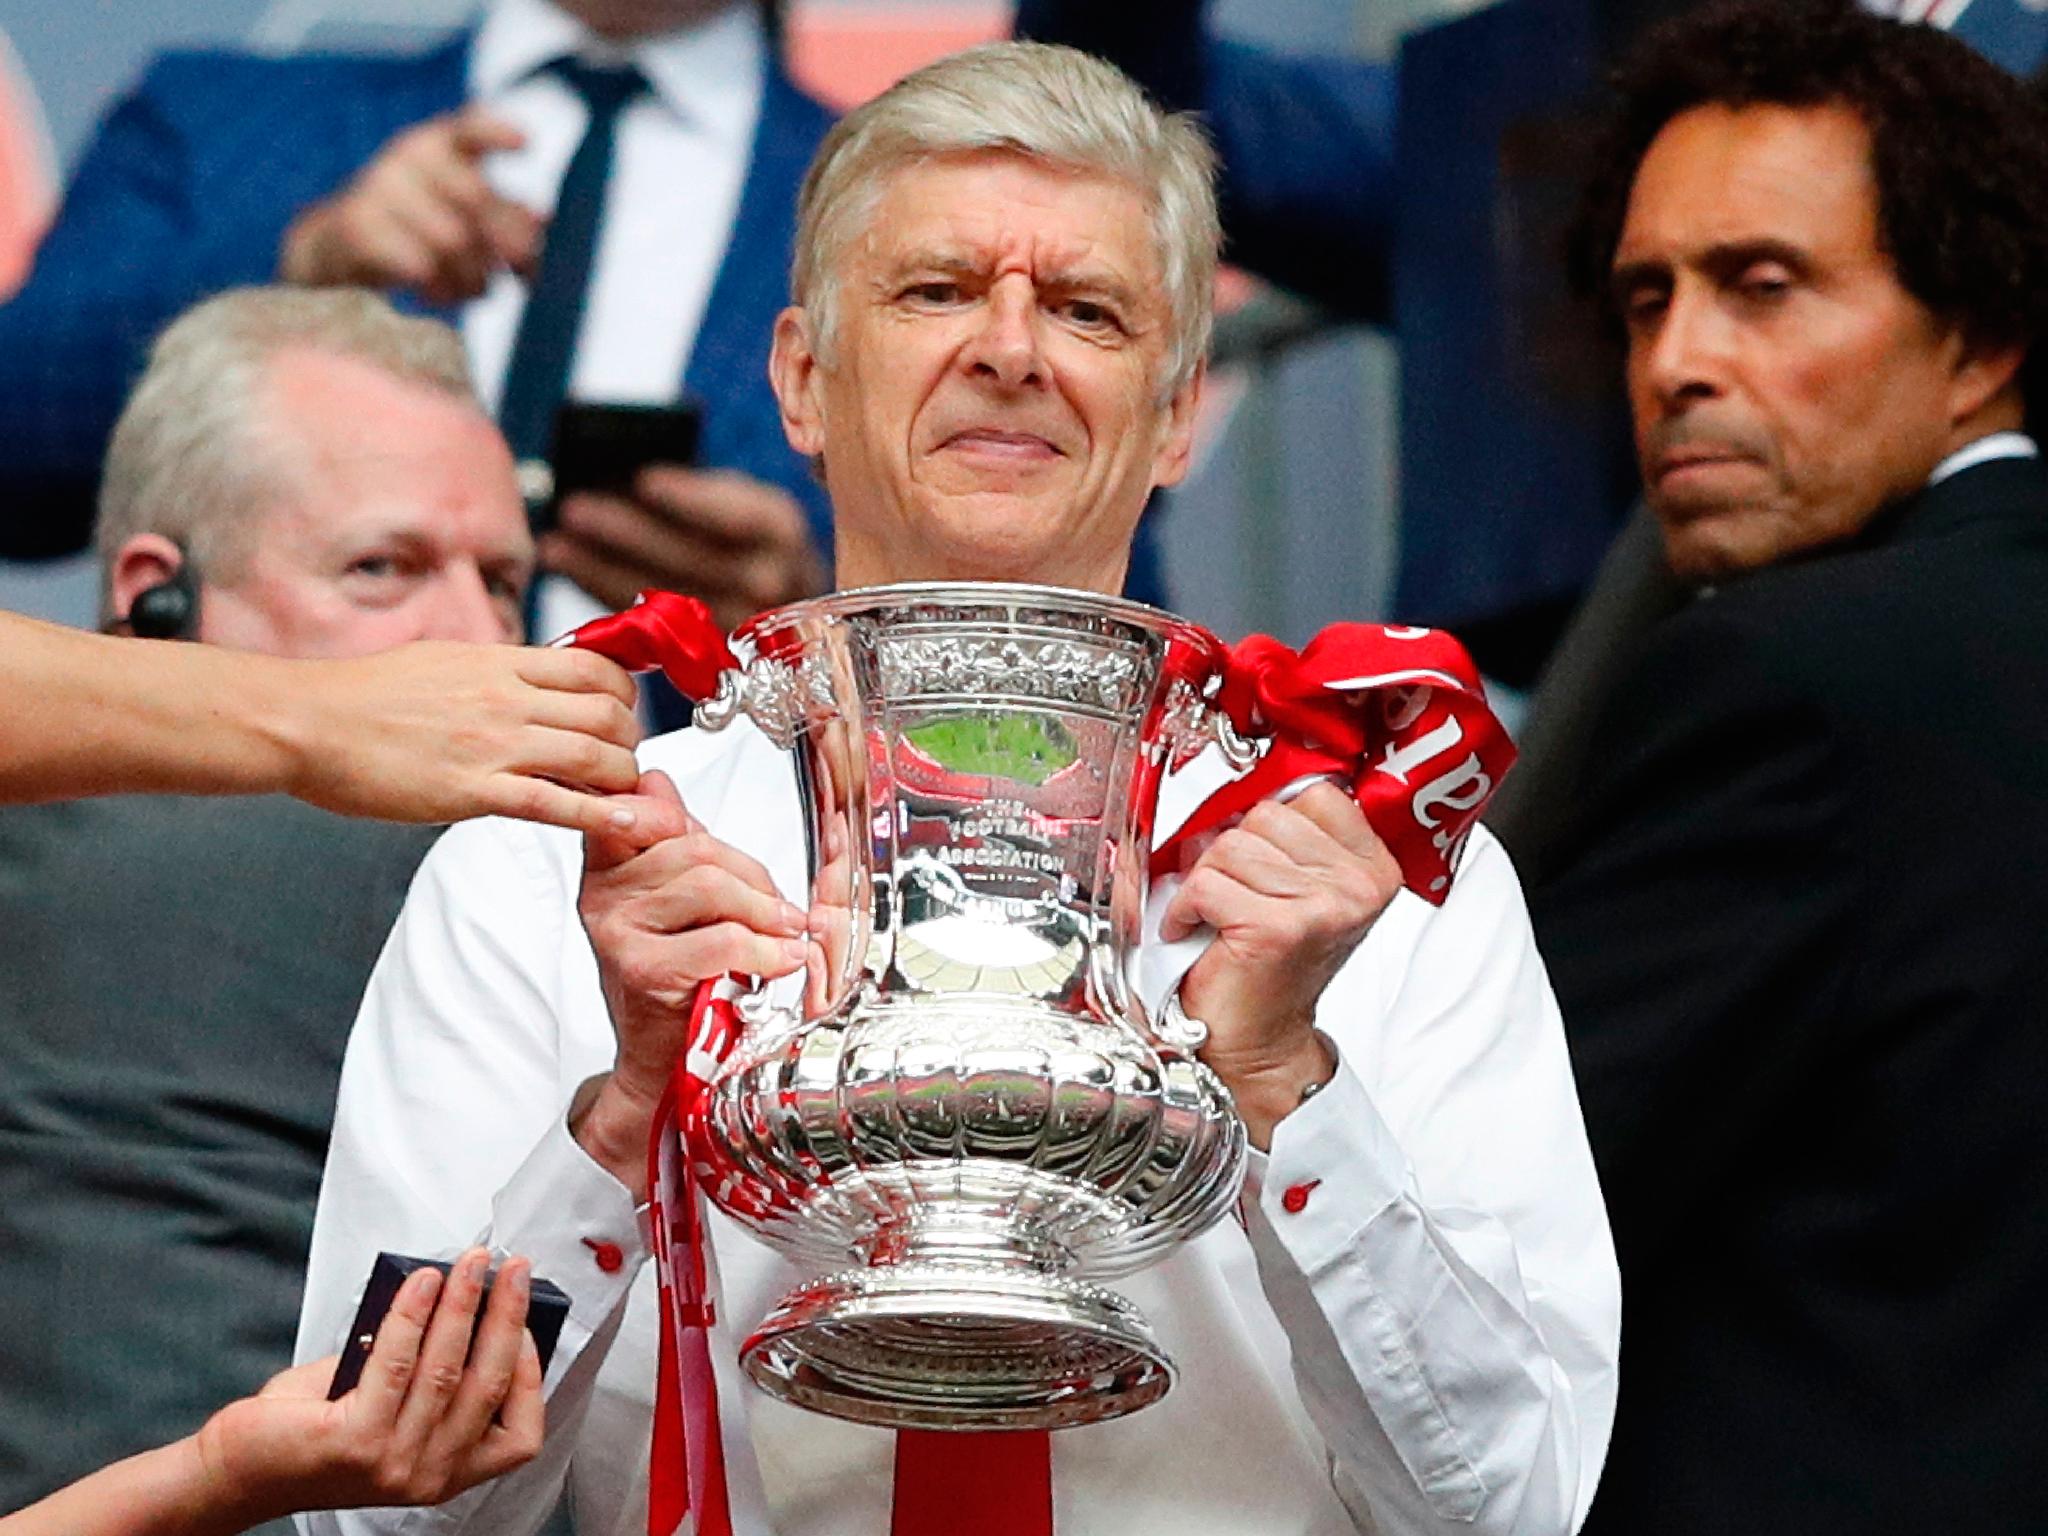 Arsene Wenger resigns: Arsenal manager will leave club at end of the season